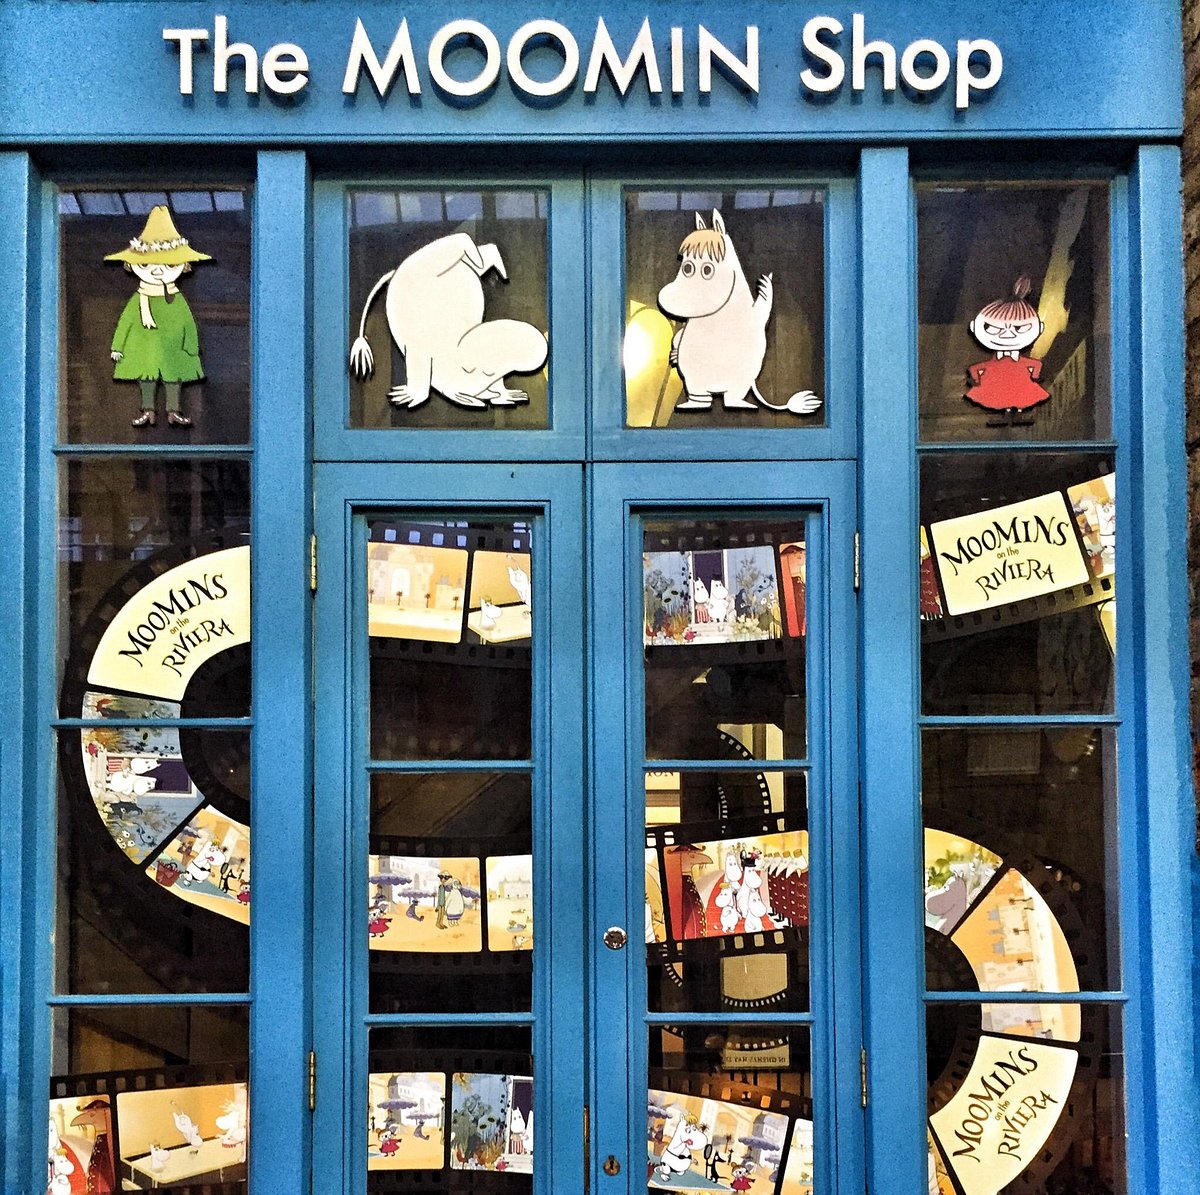 There are shops in london. The Moomin shop London.